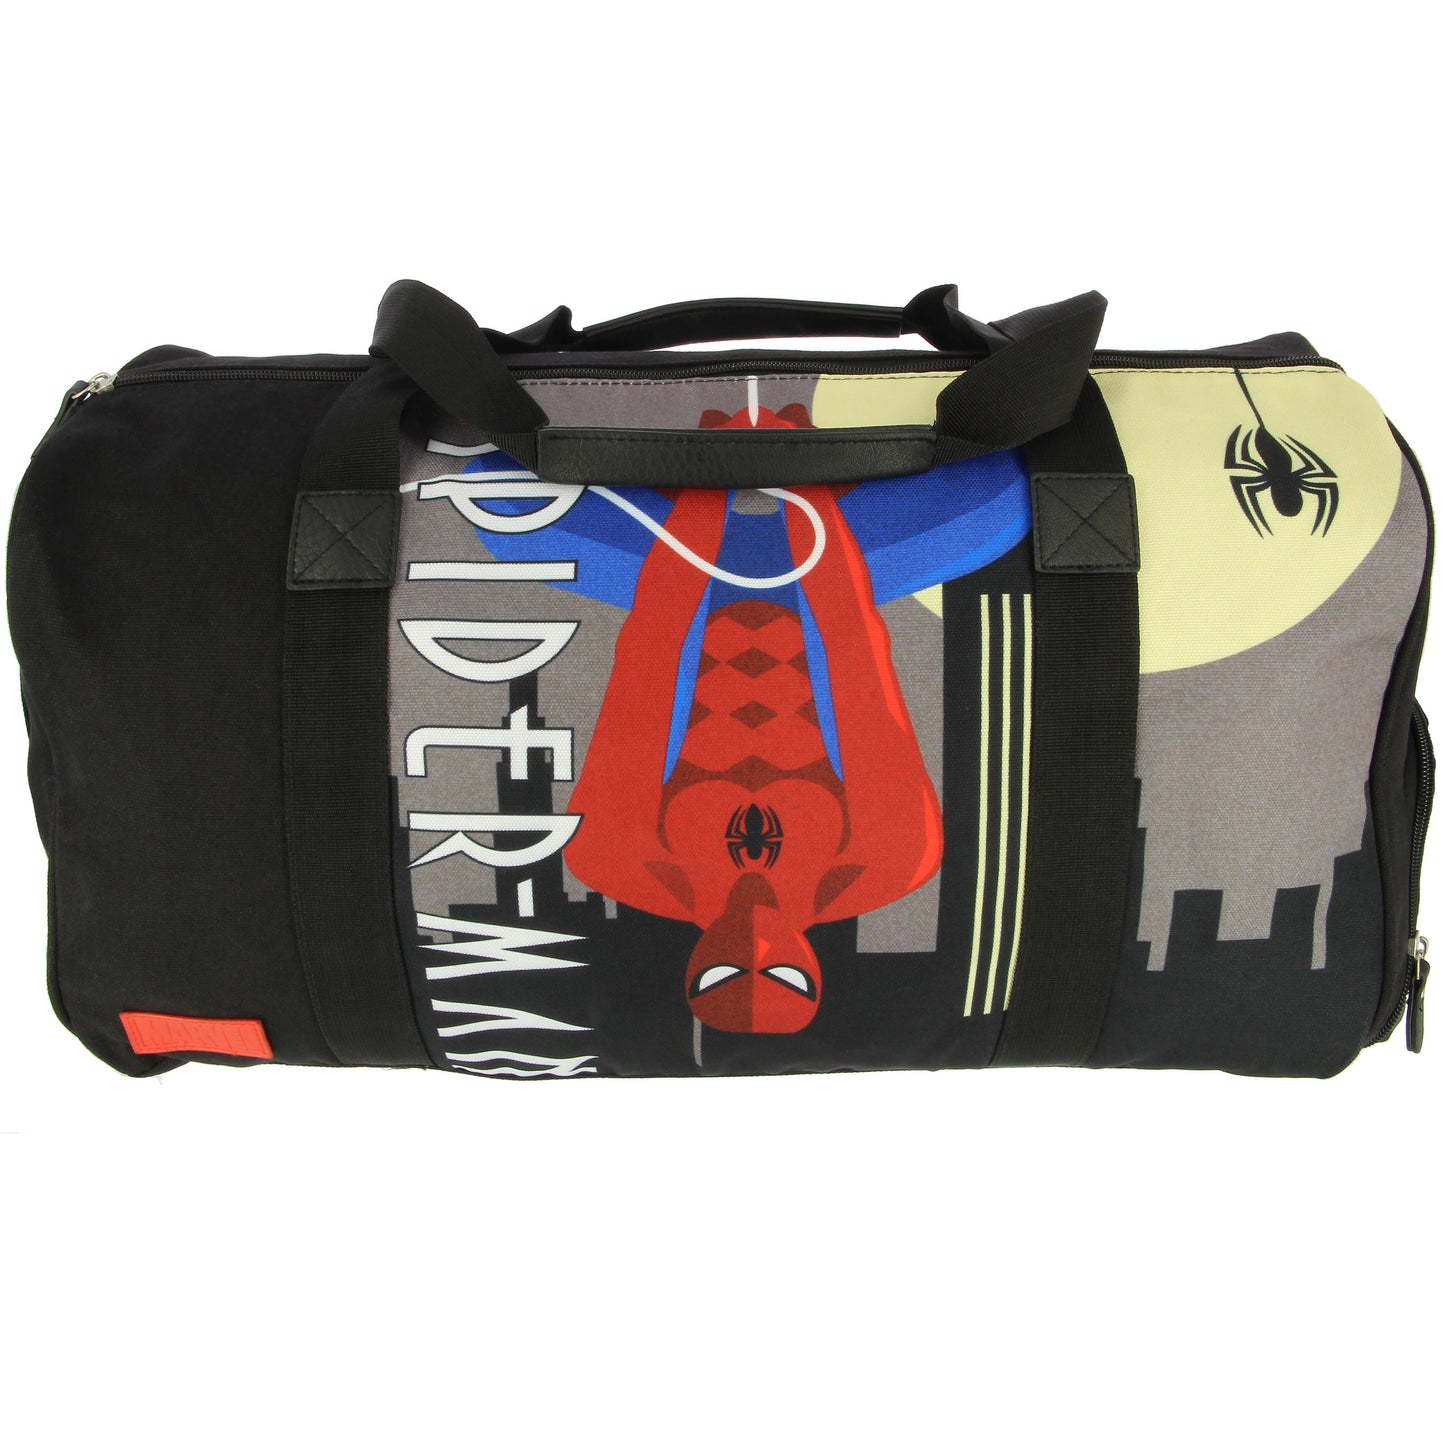 On Sale- Beyondtrend - Spiderman Decadent Duffel Canvas Travel Bag Weekend Holiday